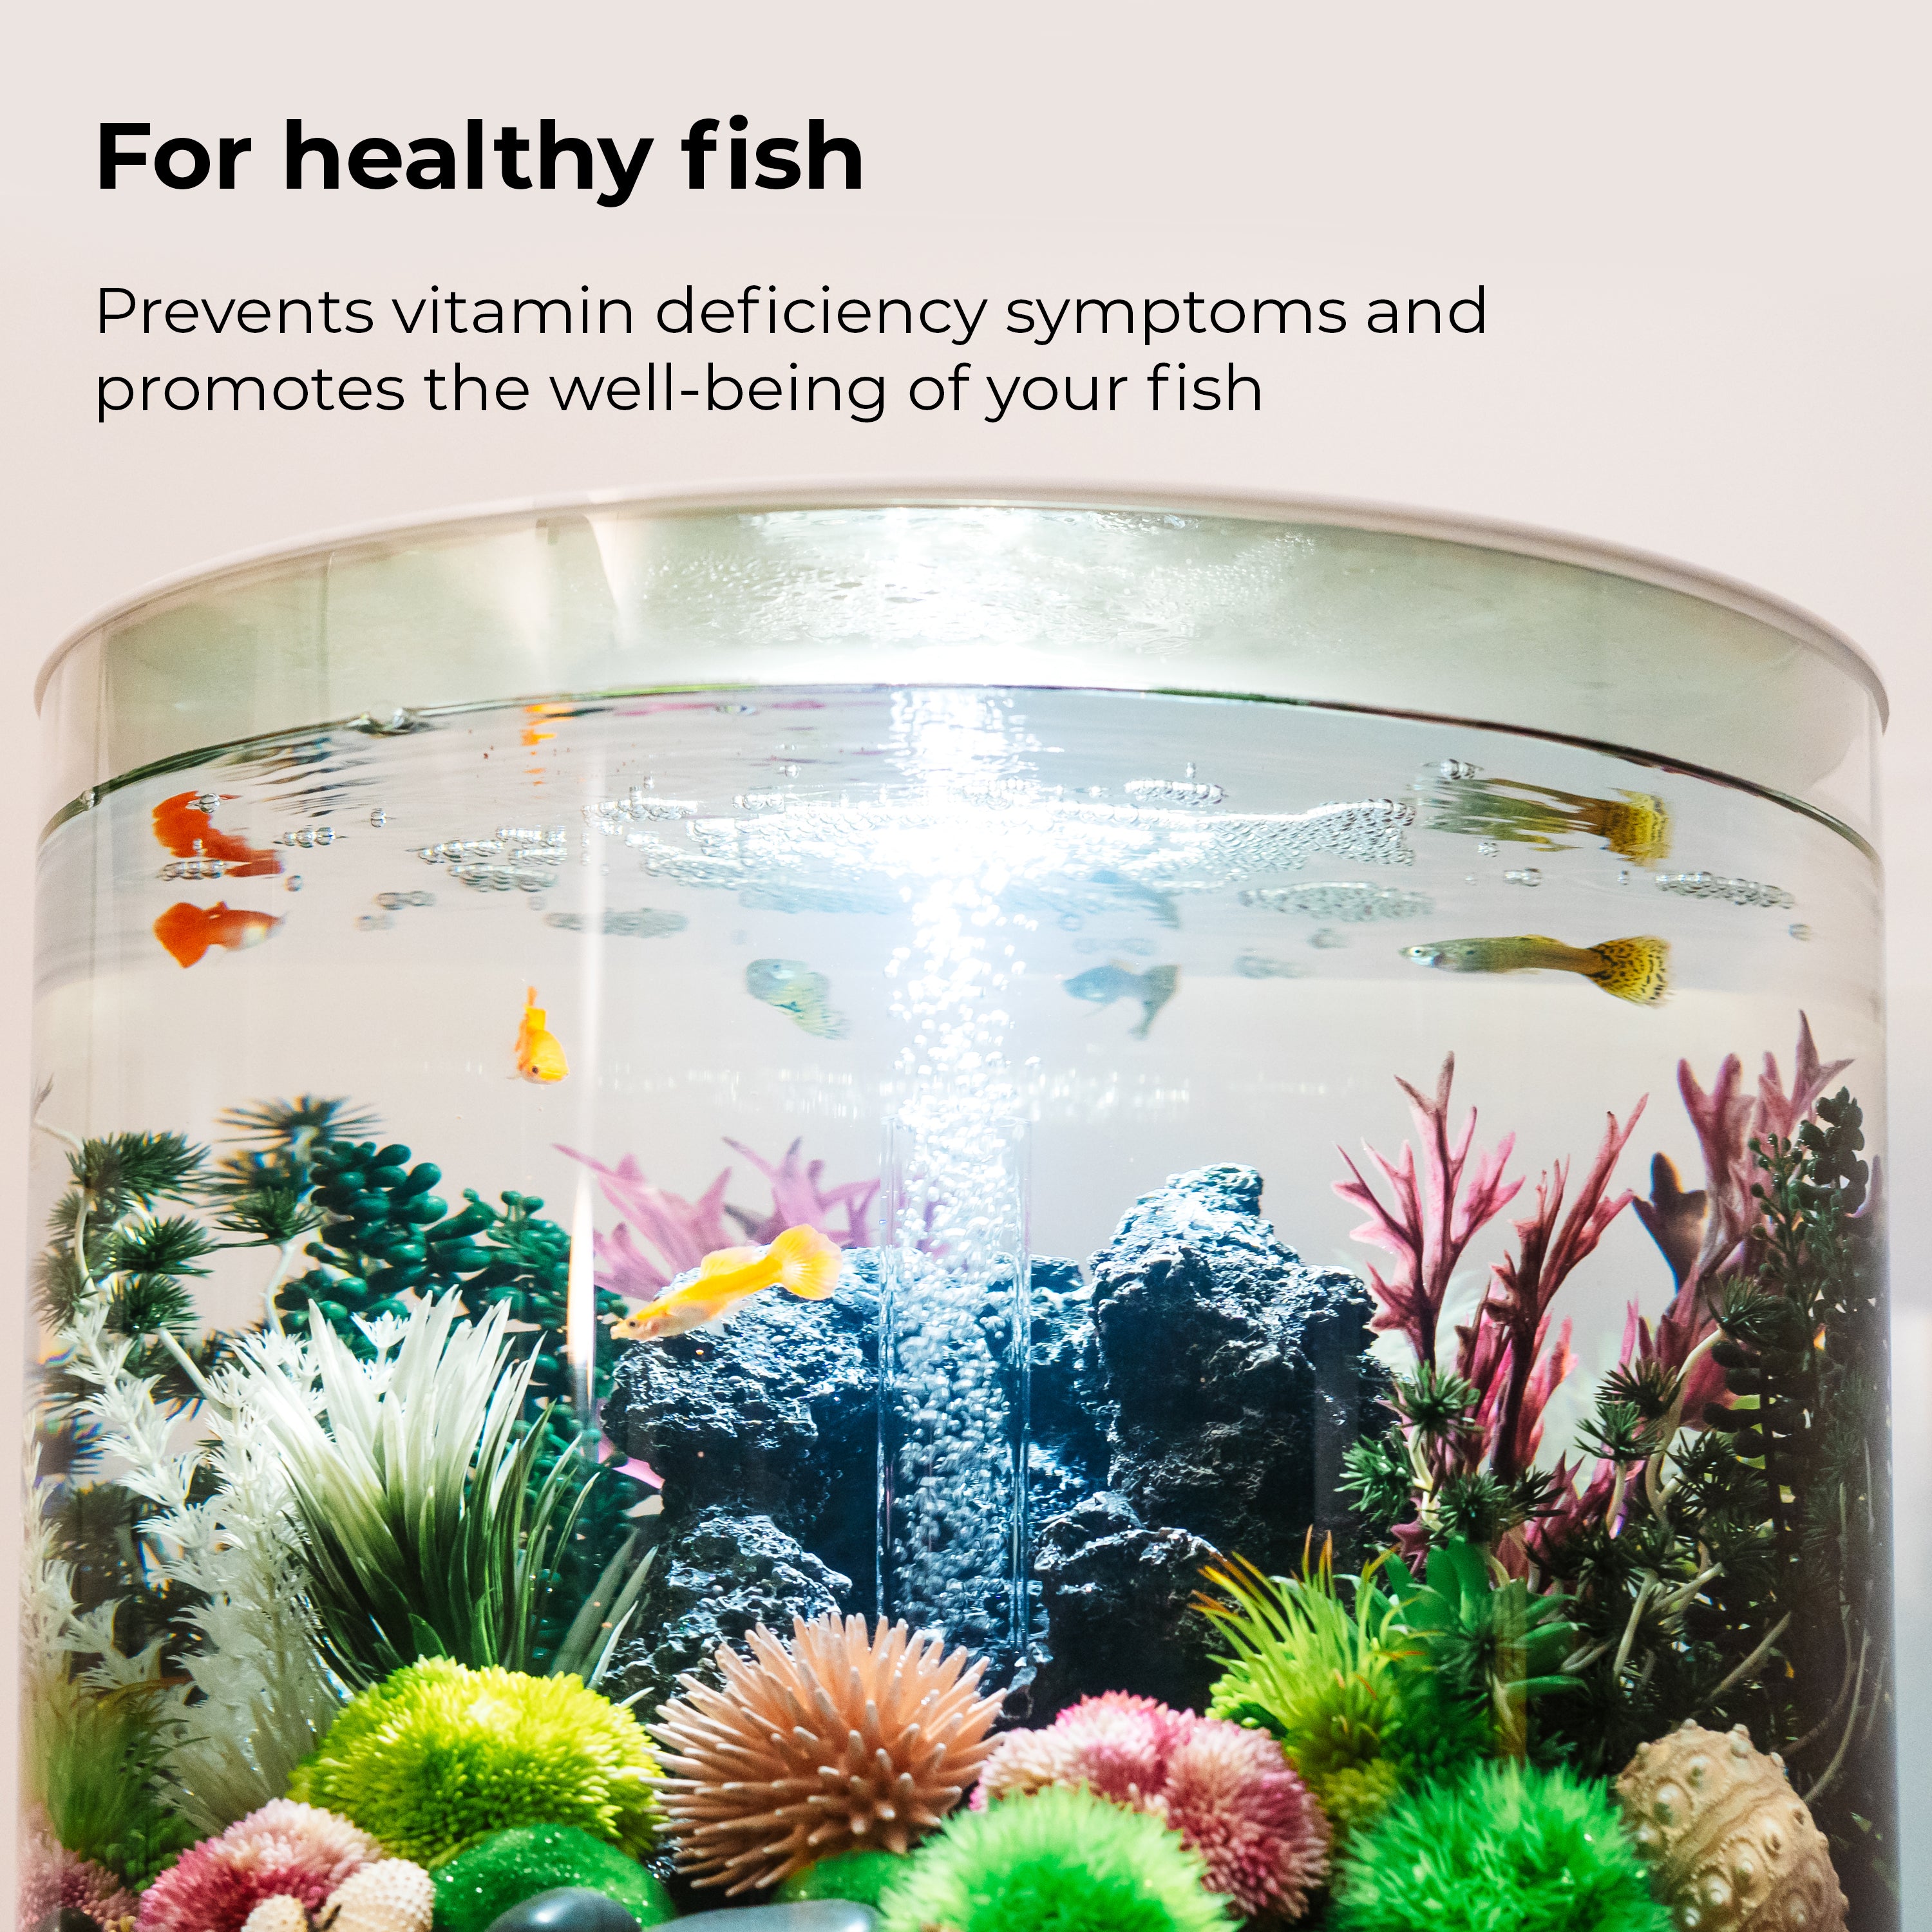 Complete Care - For healthy fish